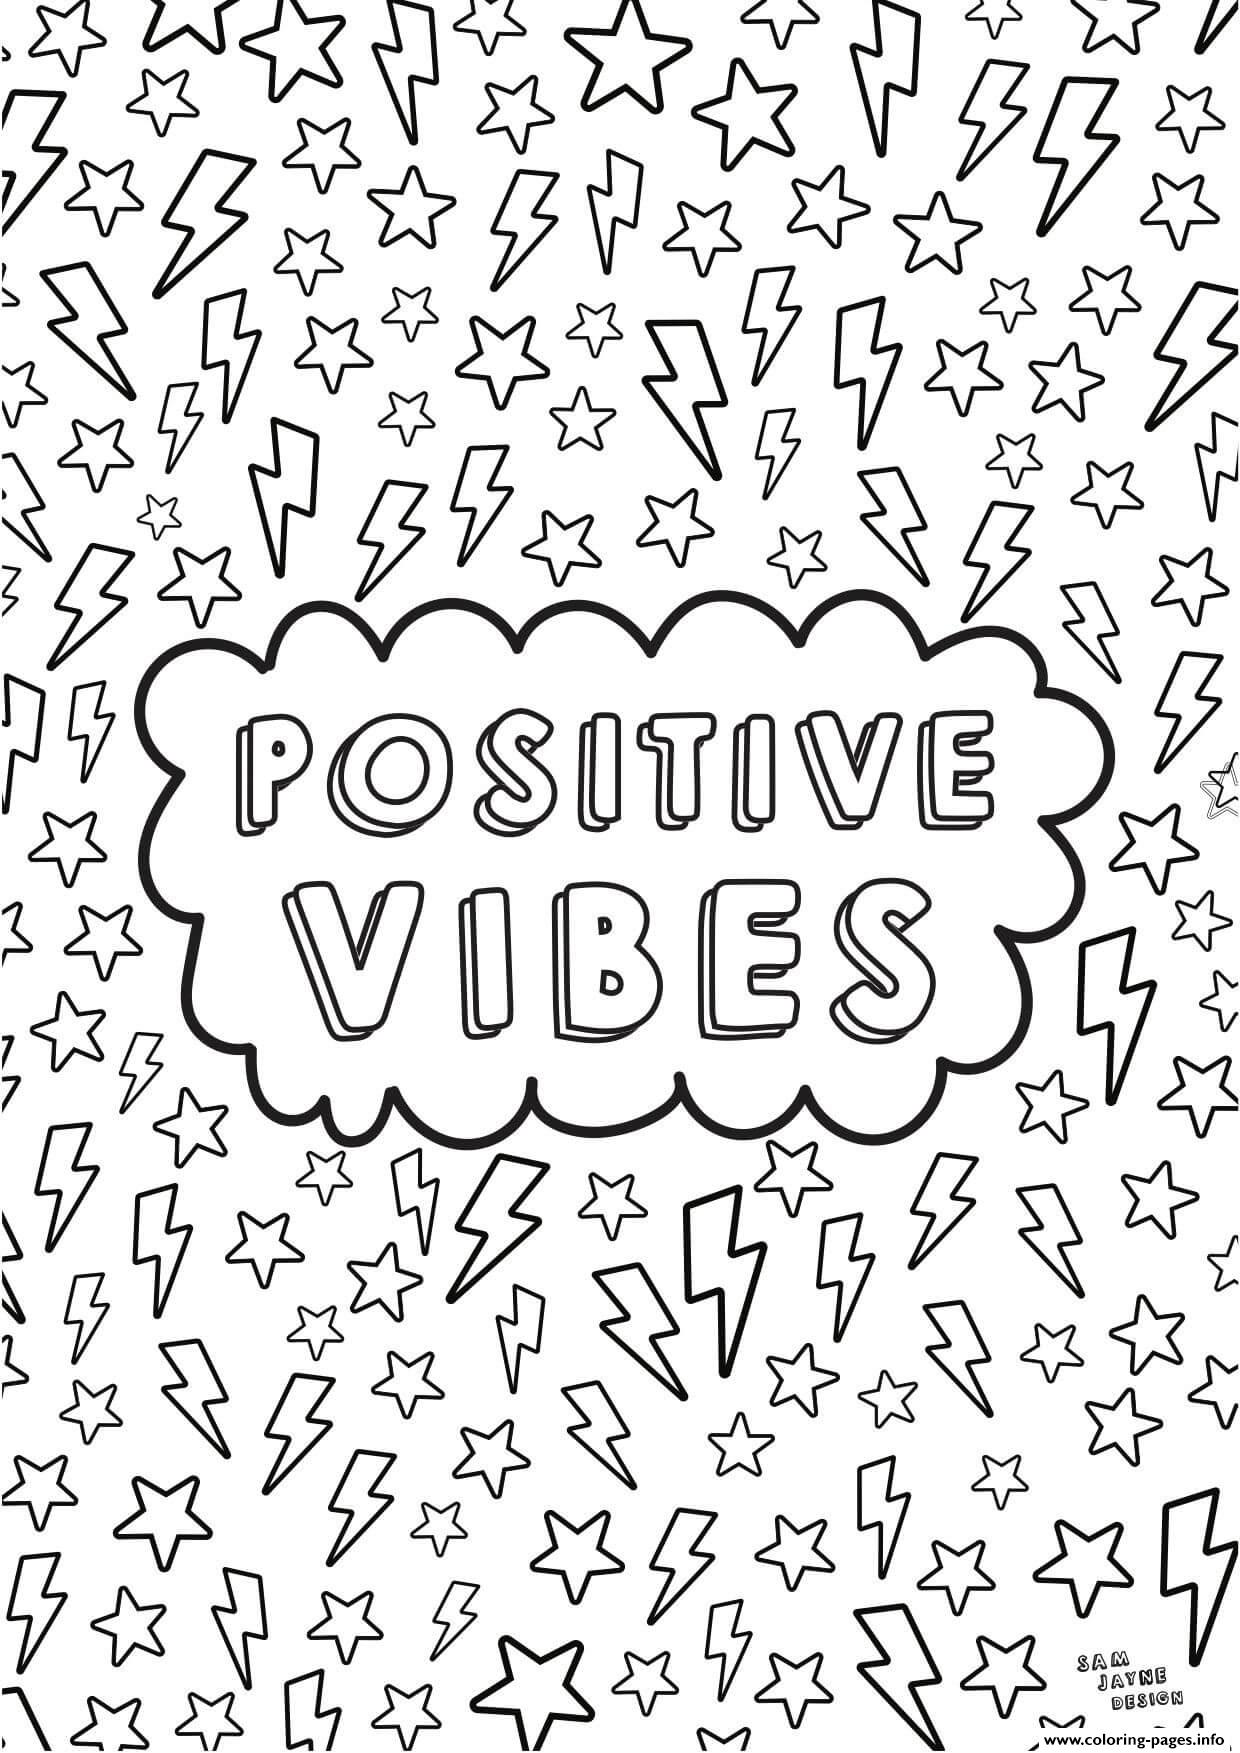 Positive Vibes Aesthetics Coloring Pages Printable